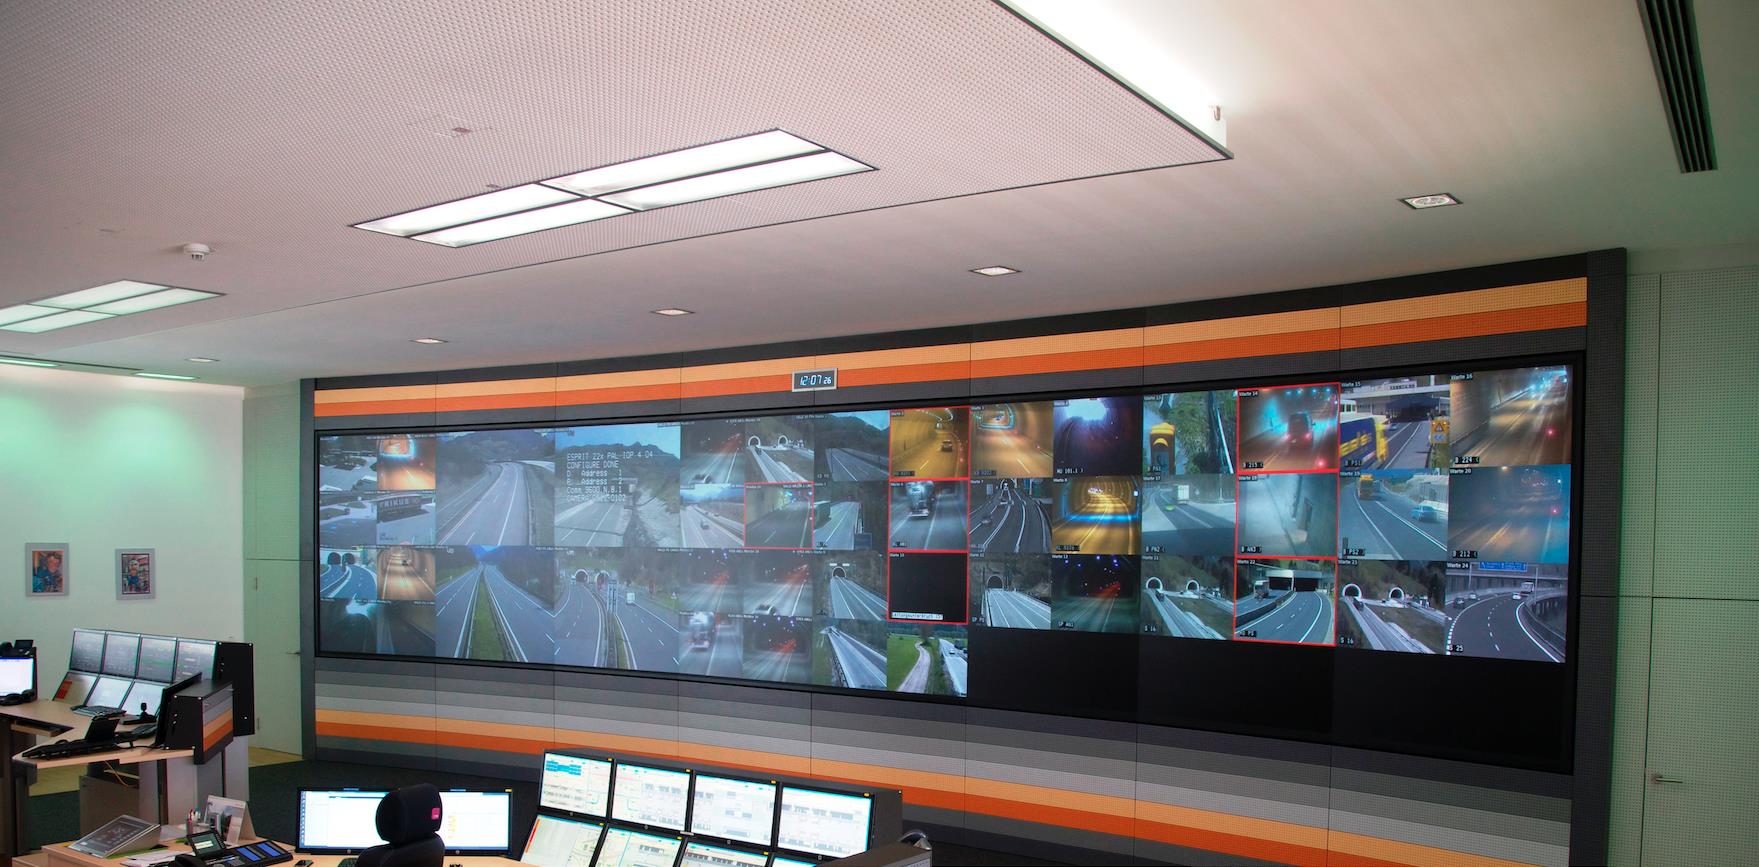 Figure 1: Example of a tunnel CCTV system